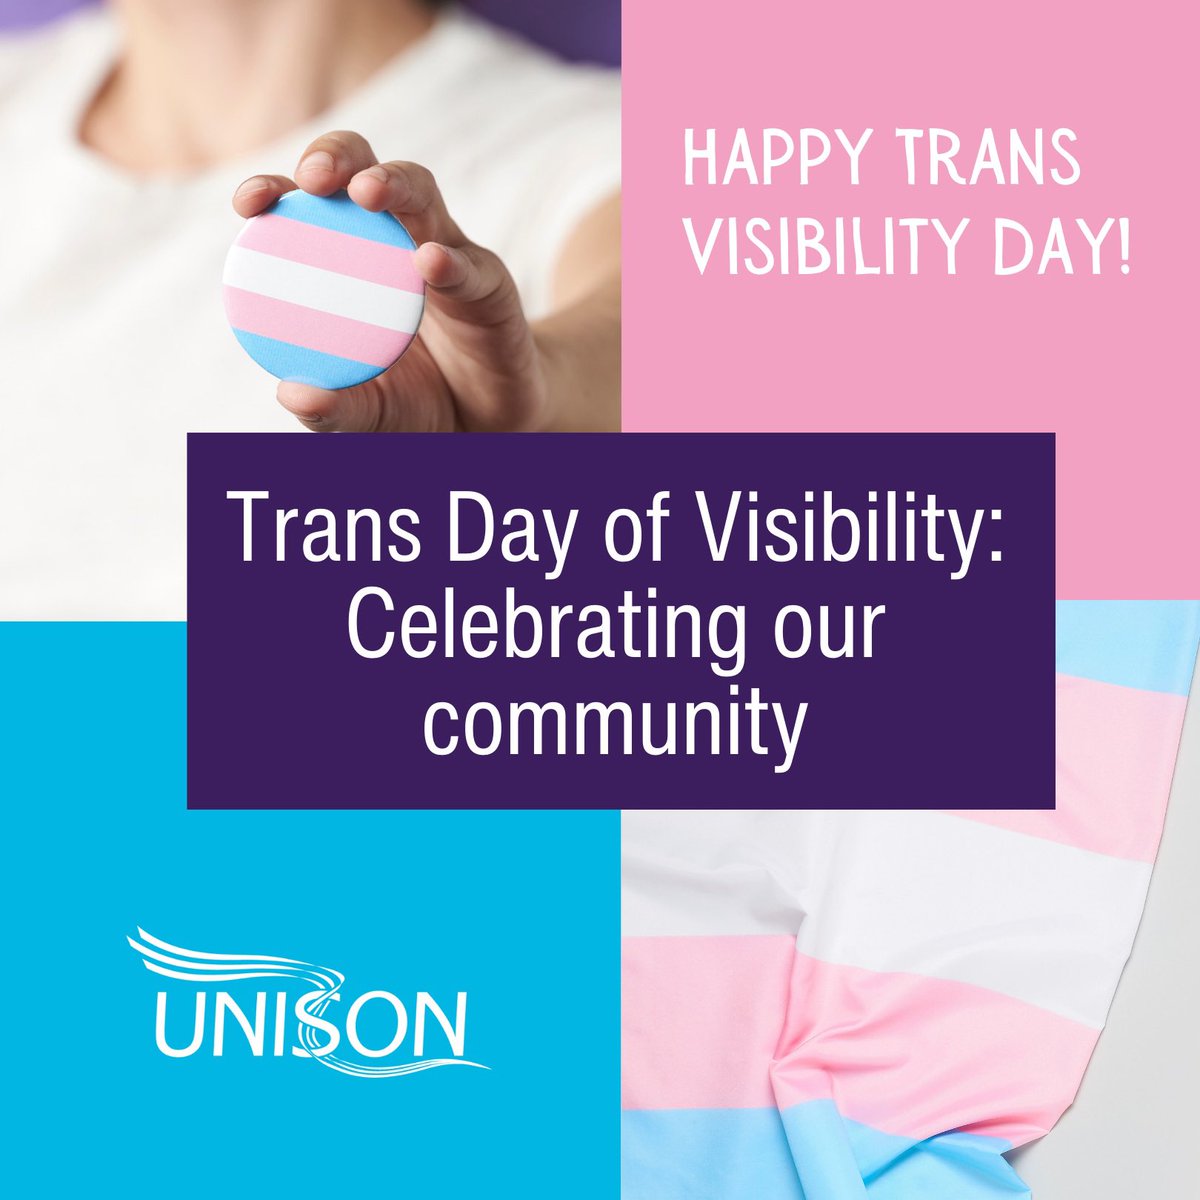 Today on #TransDayofVisibility we celebrate and recognise trans and gender diverse experiences and achievements 🏳️‍⚧️